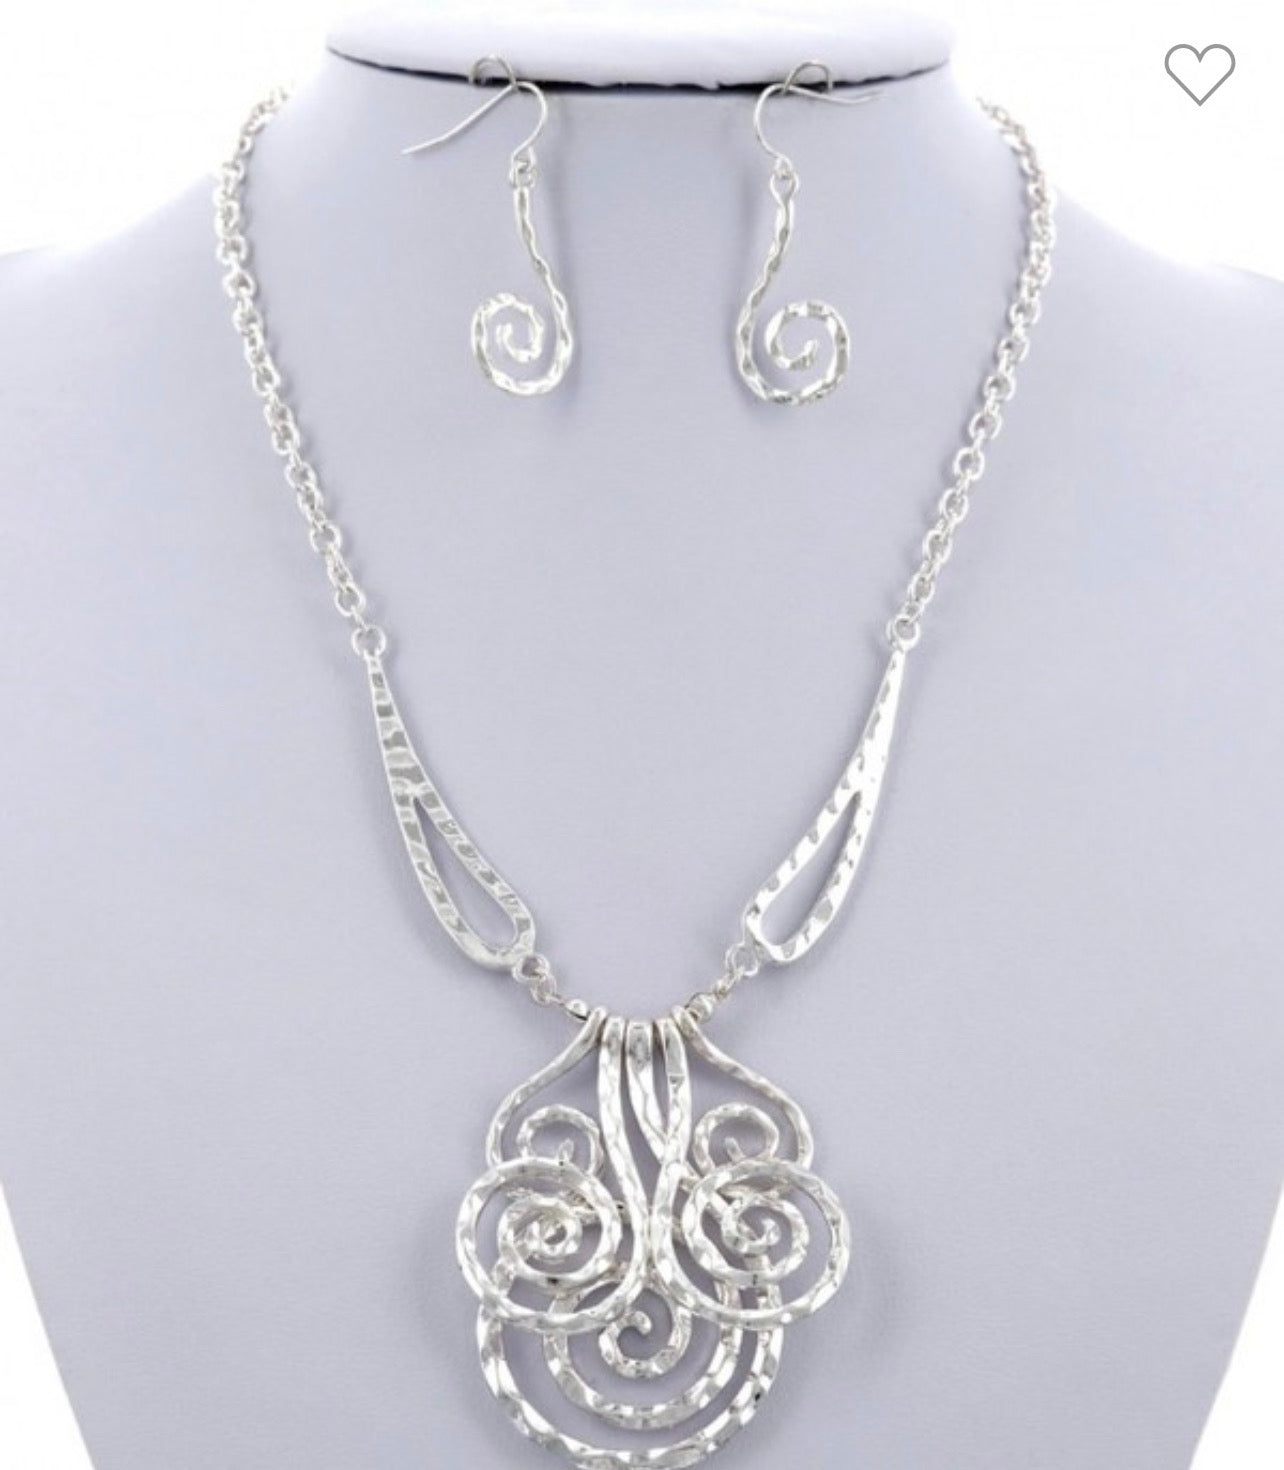 Swirl design necklace and earrings silver 16 -18 inch